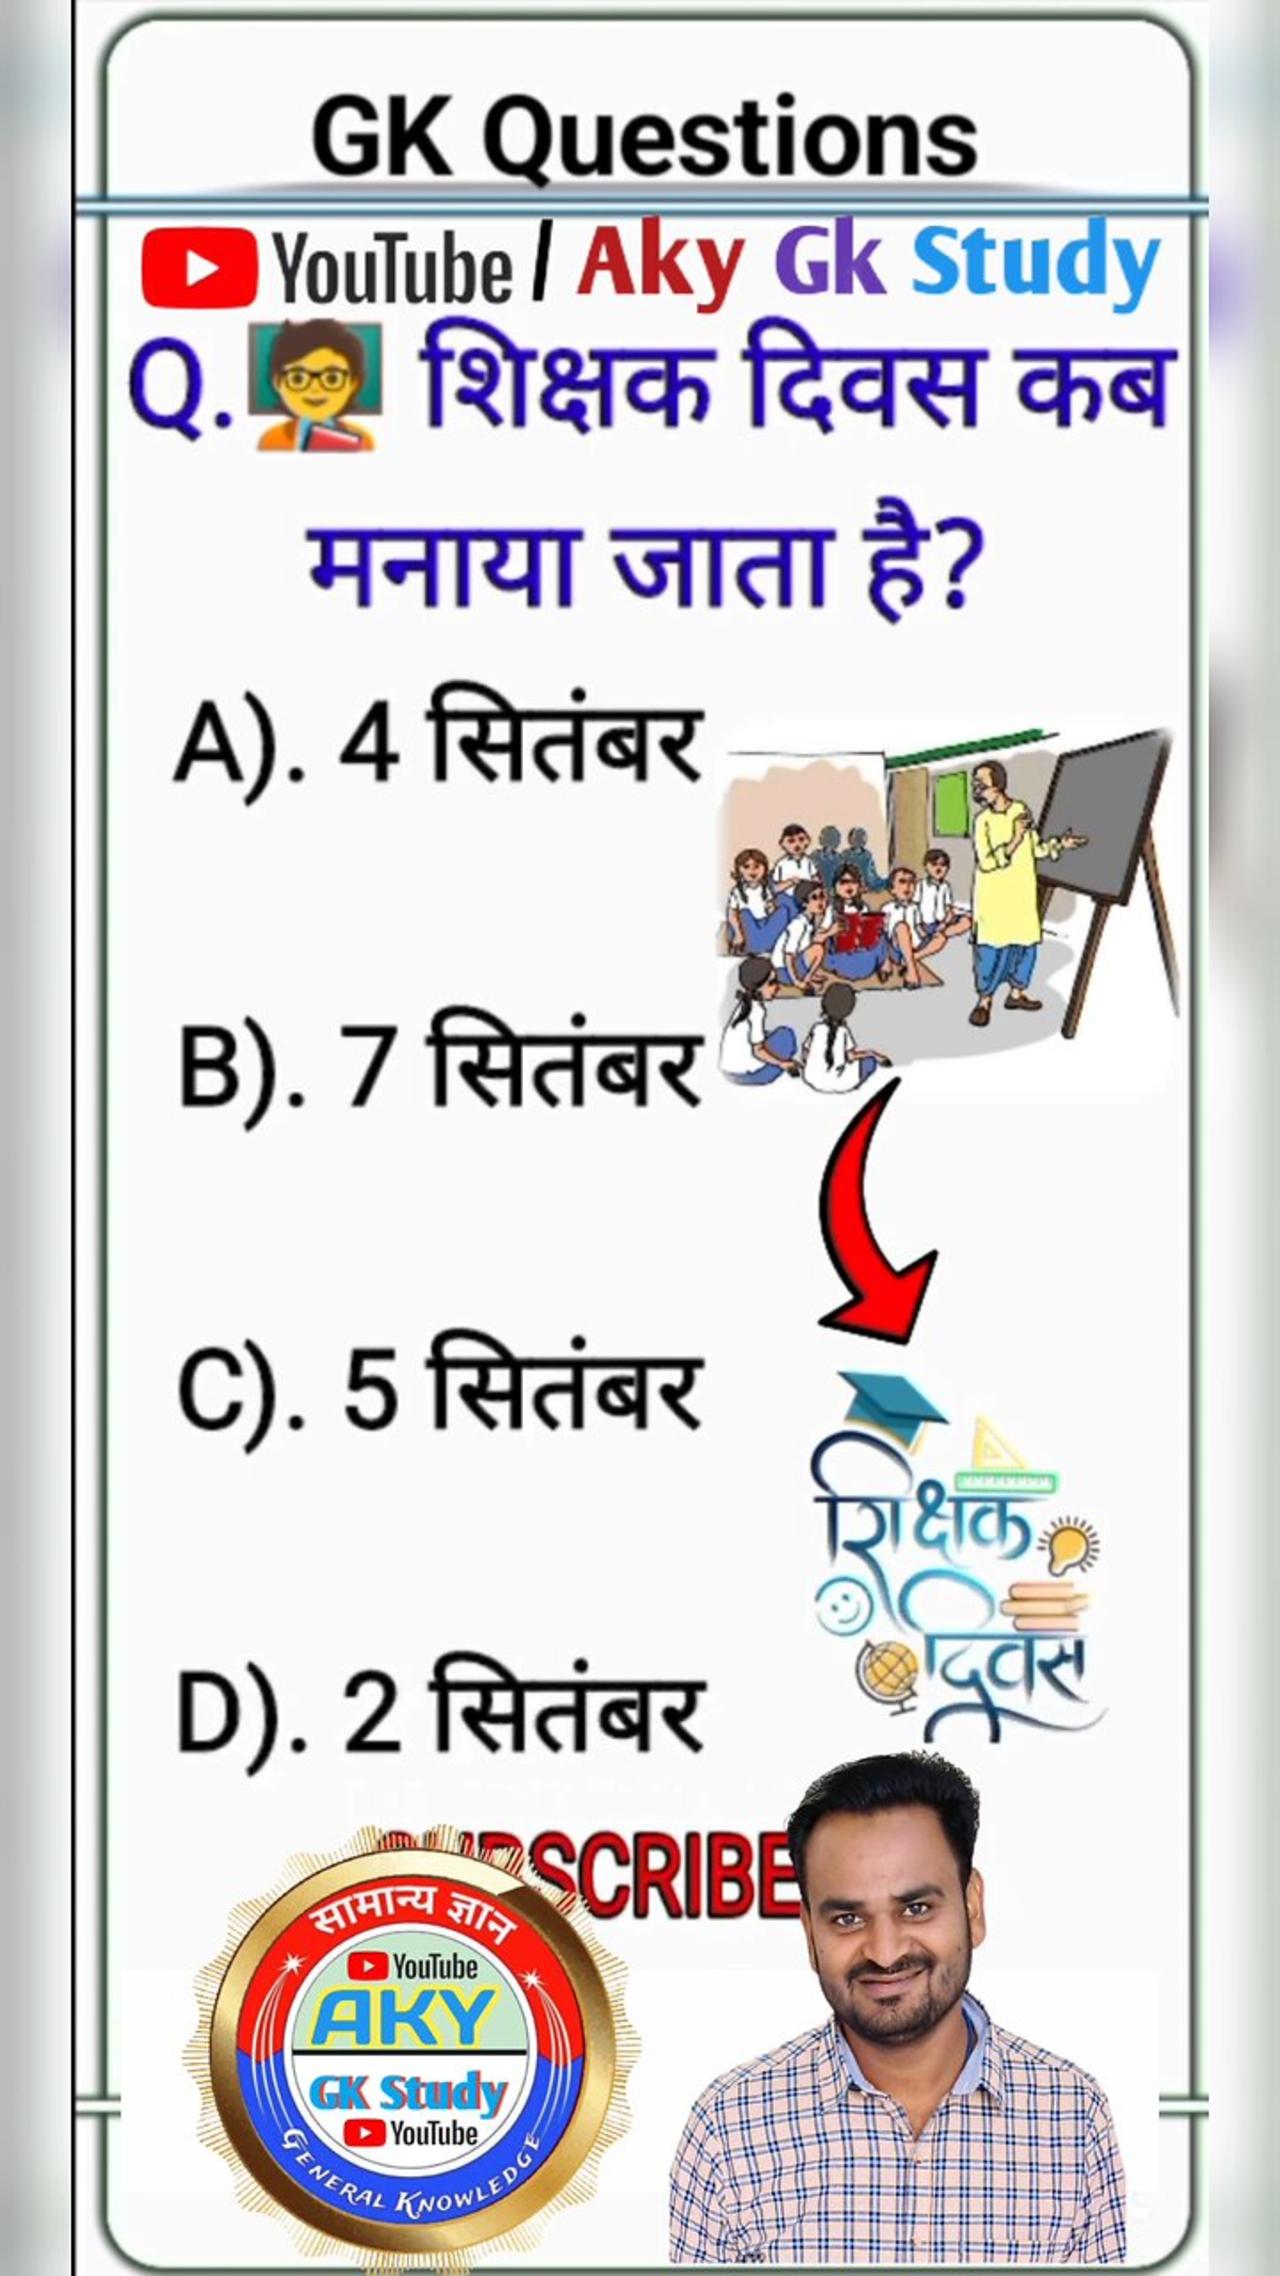 upsc questions | Gk quiz in Hindi | Gk questions #gkfacts #gk #gkquestion #motivation #upsc #ips